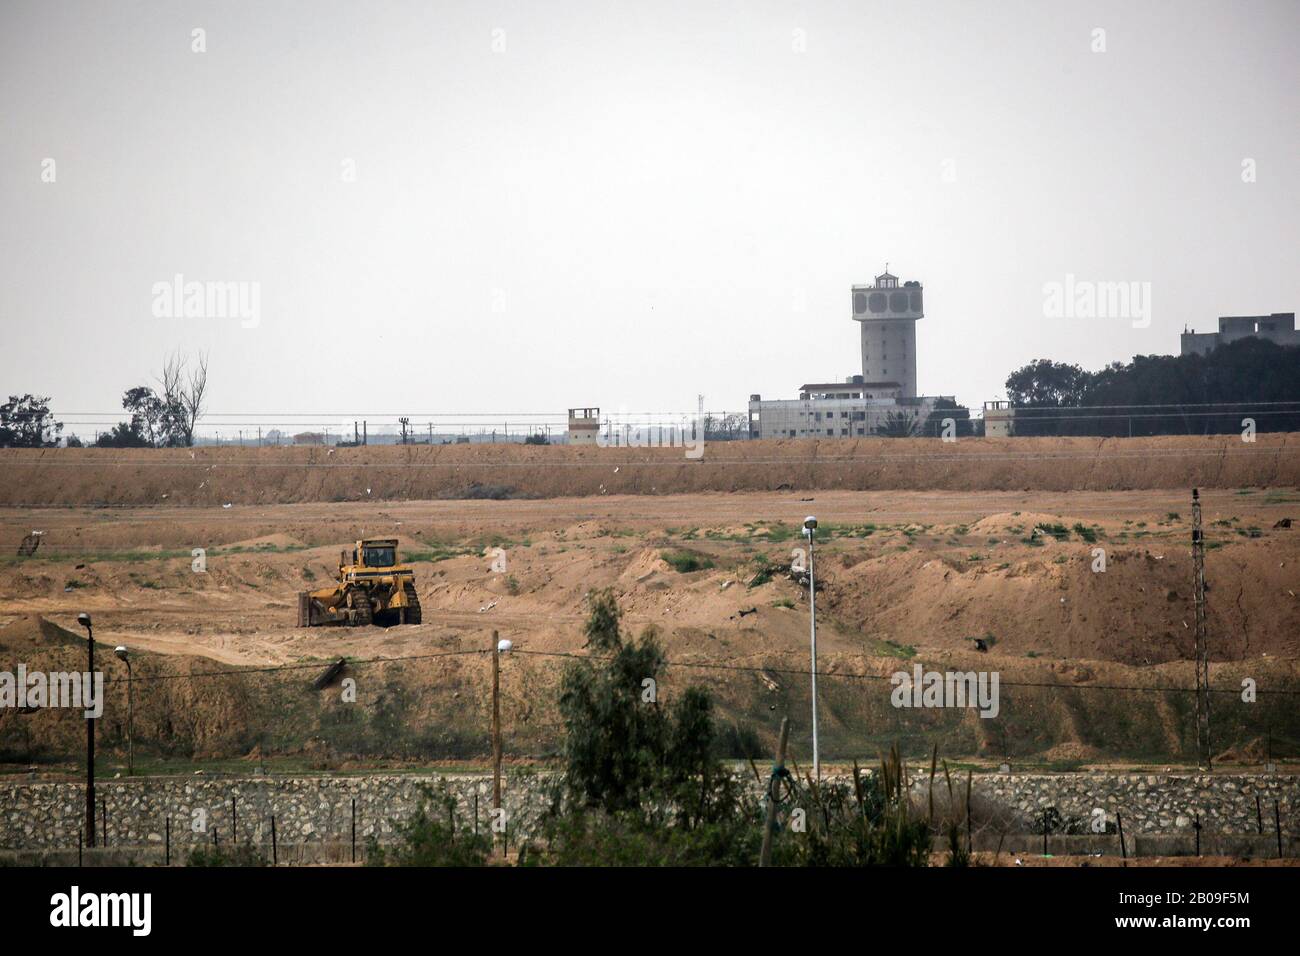 A picture taken in Gaza Strip at the border with Egypt shows the construction site of a wall on the Egyptian side of the border on Feb 19, 2020. Stock Photo